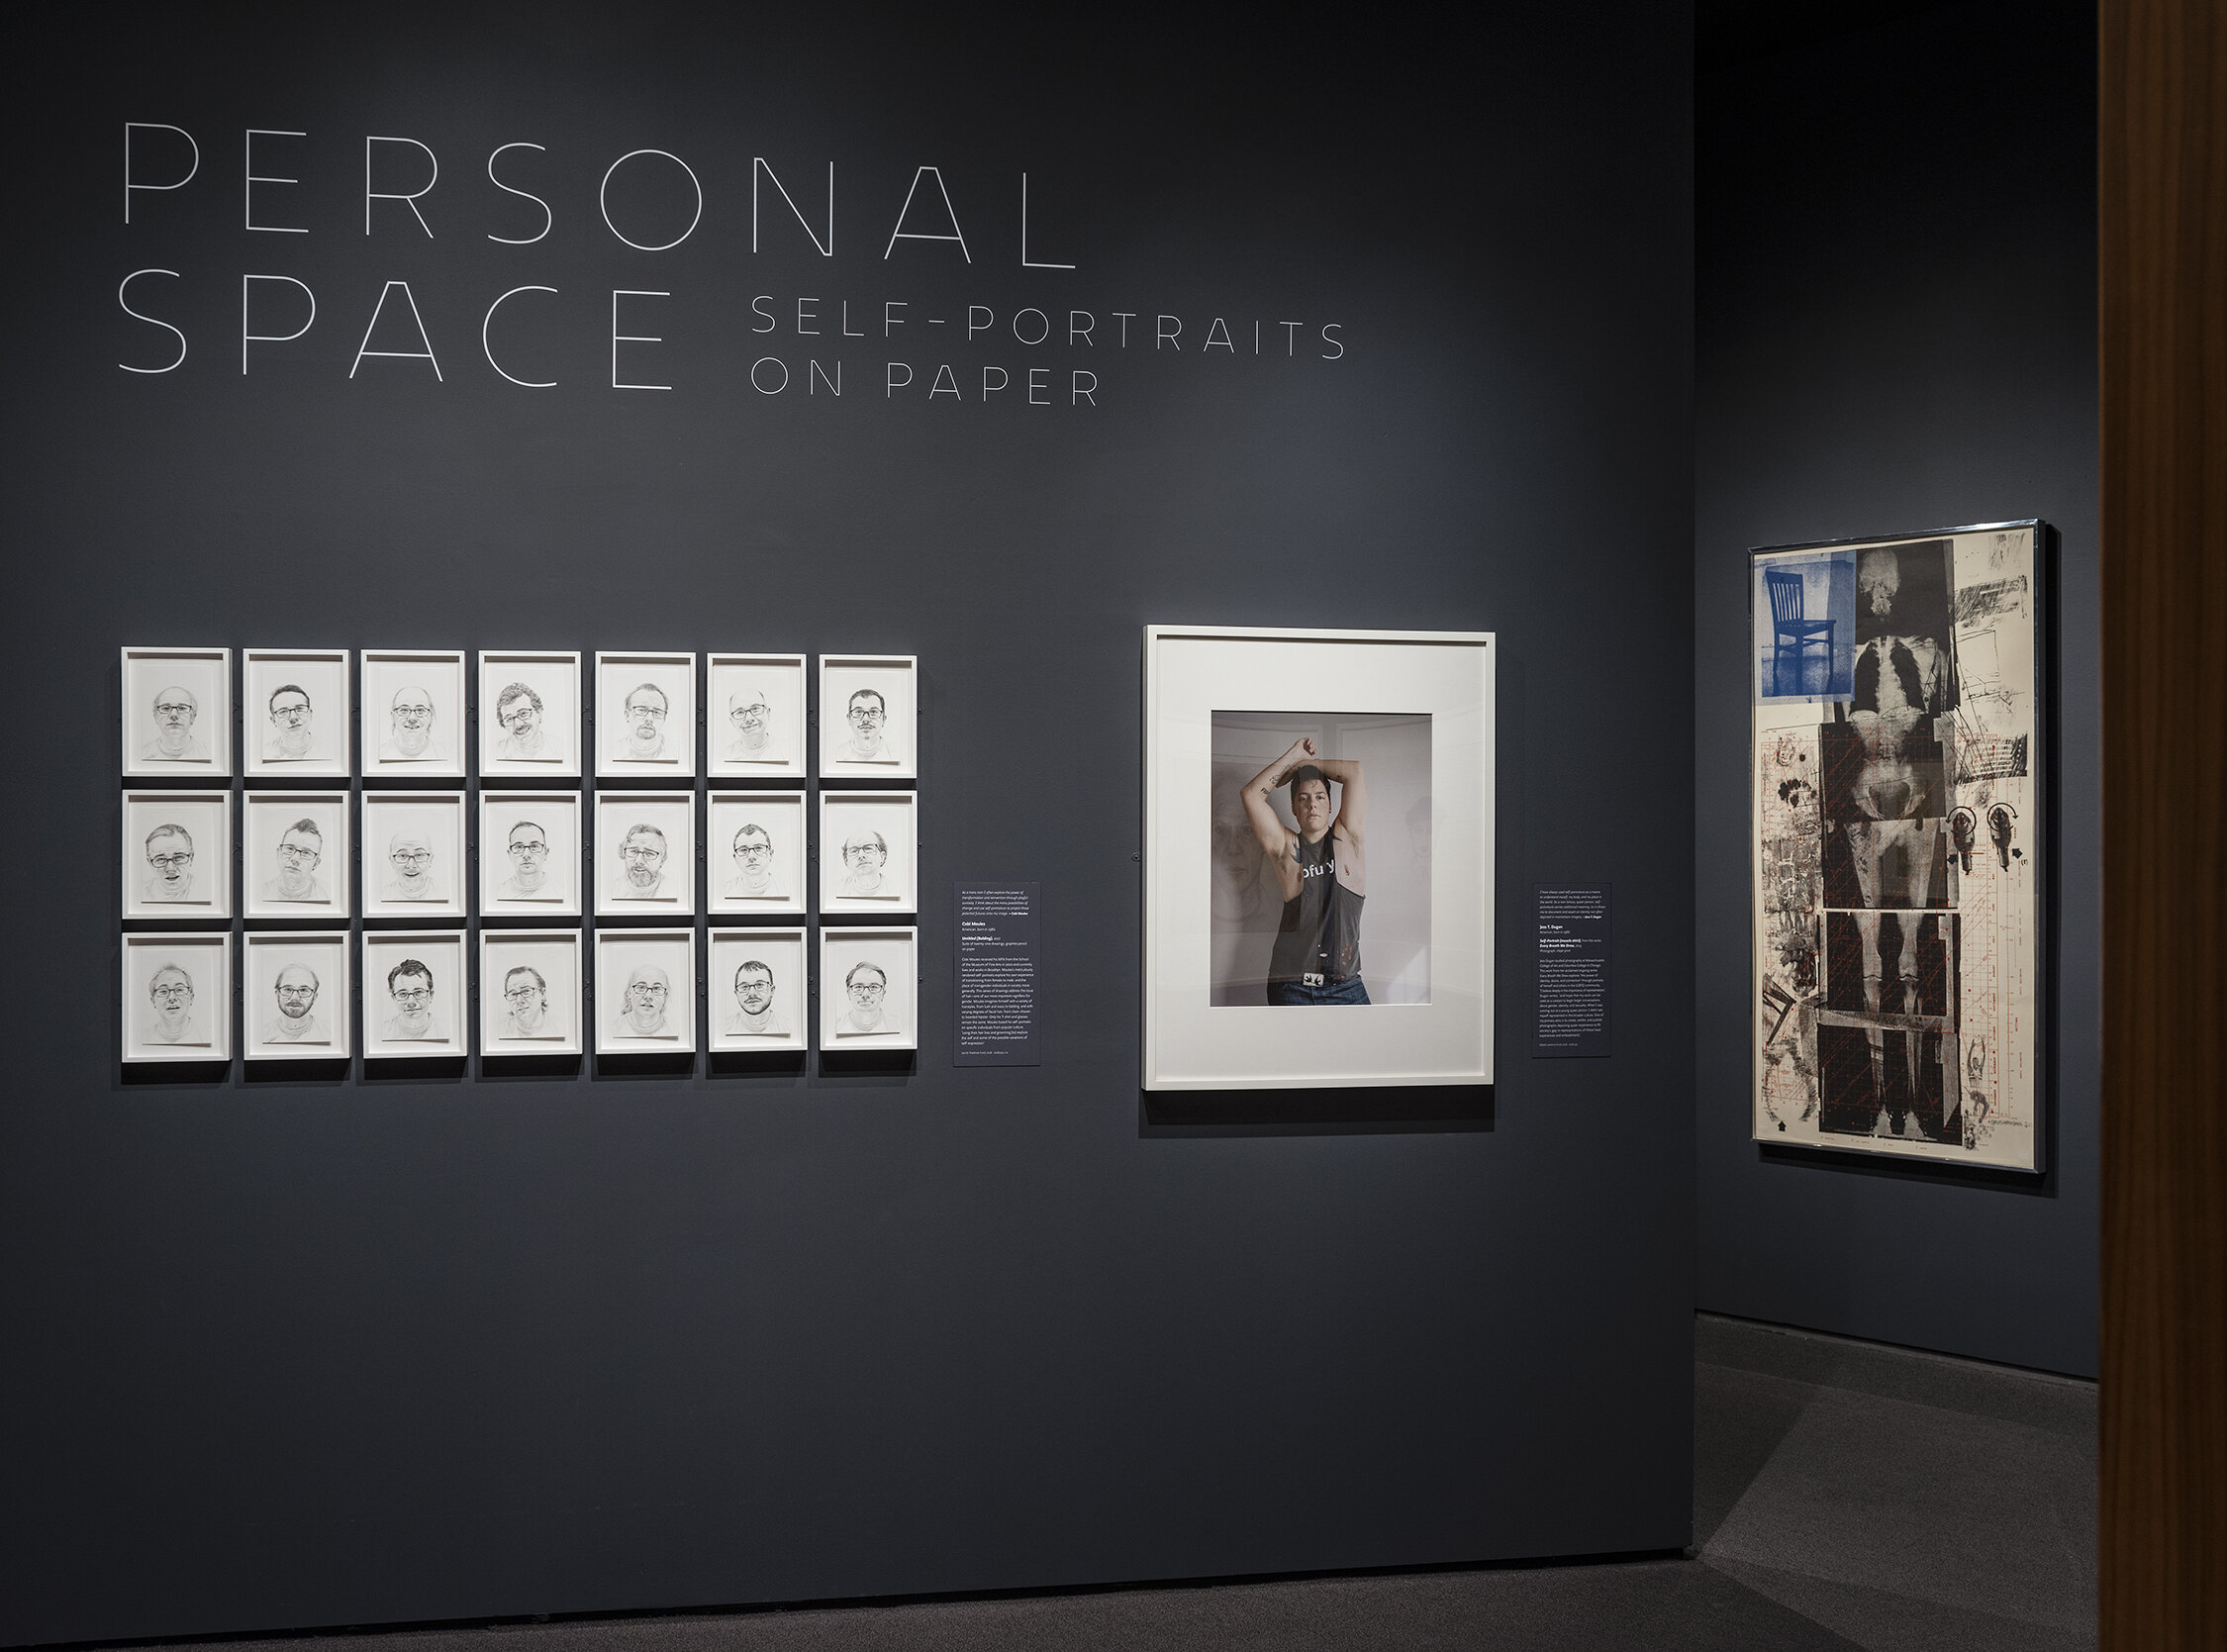   Personal Space: Self-Portraits on Paper , Museum of Fine Arts, Boston, MA, 2020 